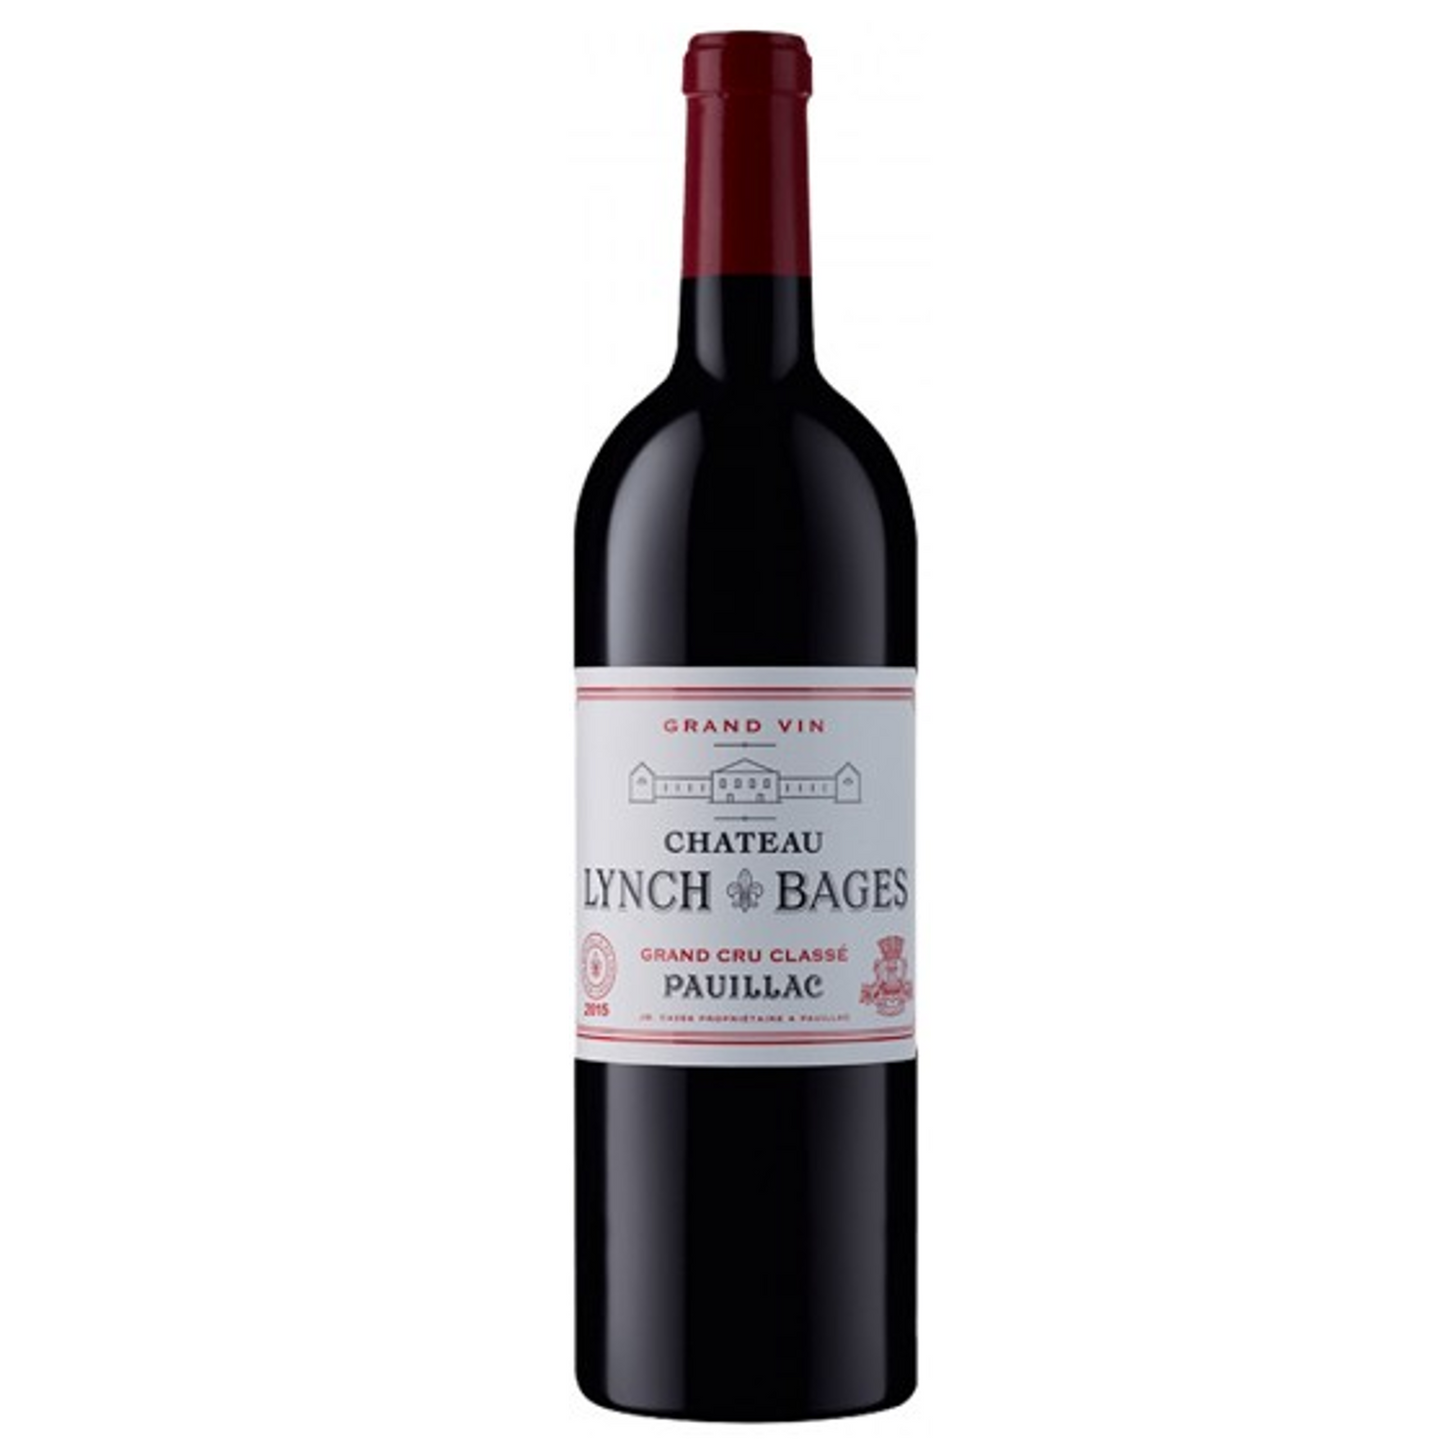 Chateau Lynch Bages 2019